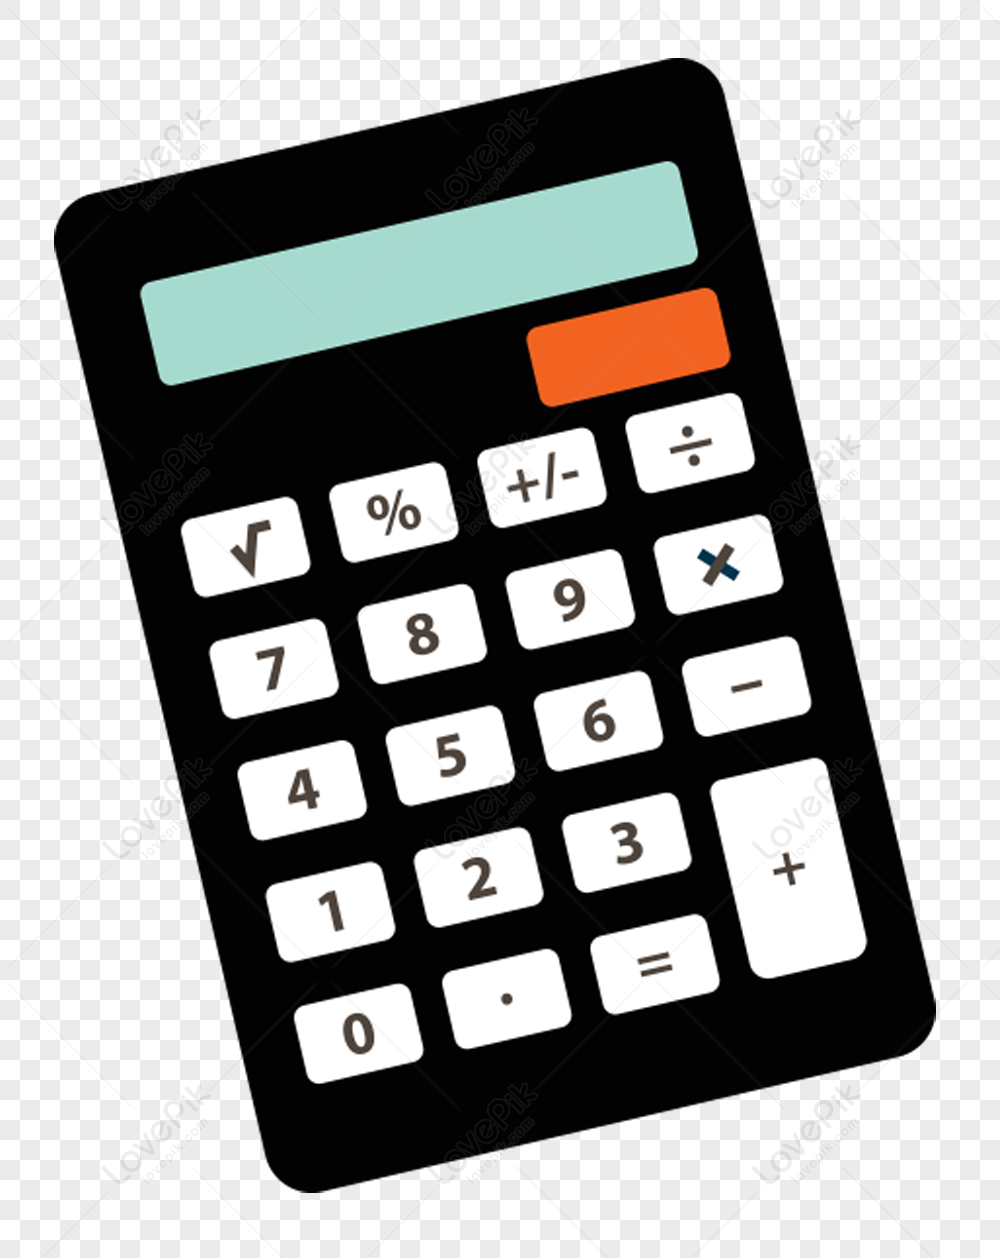 Calculator PNG Transparent Image And Clipart Image For Free Download -  Lovepik | 400329097